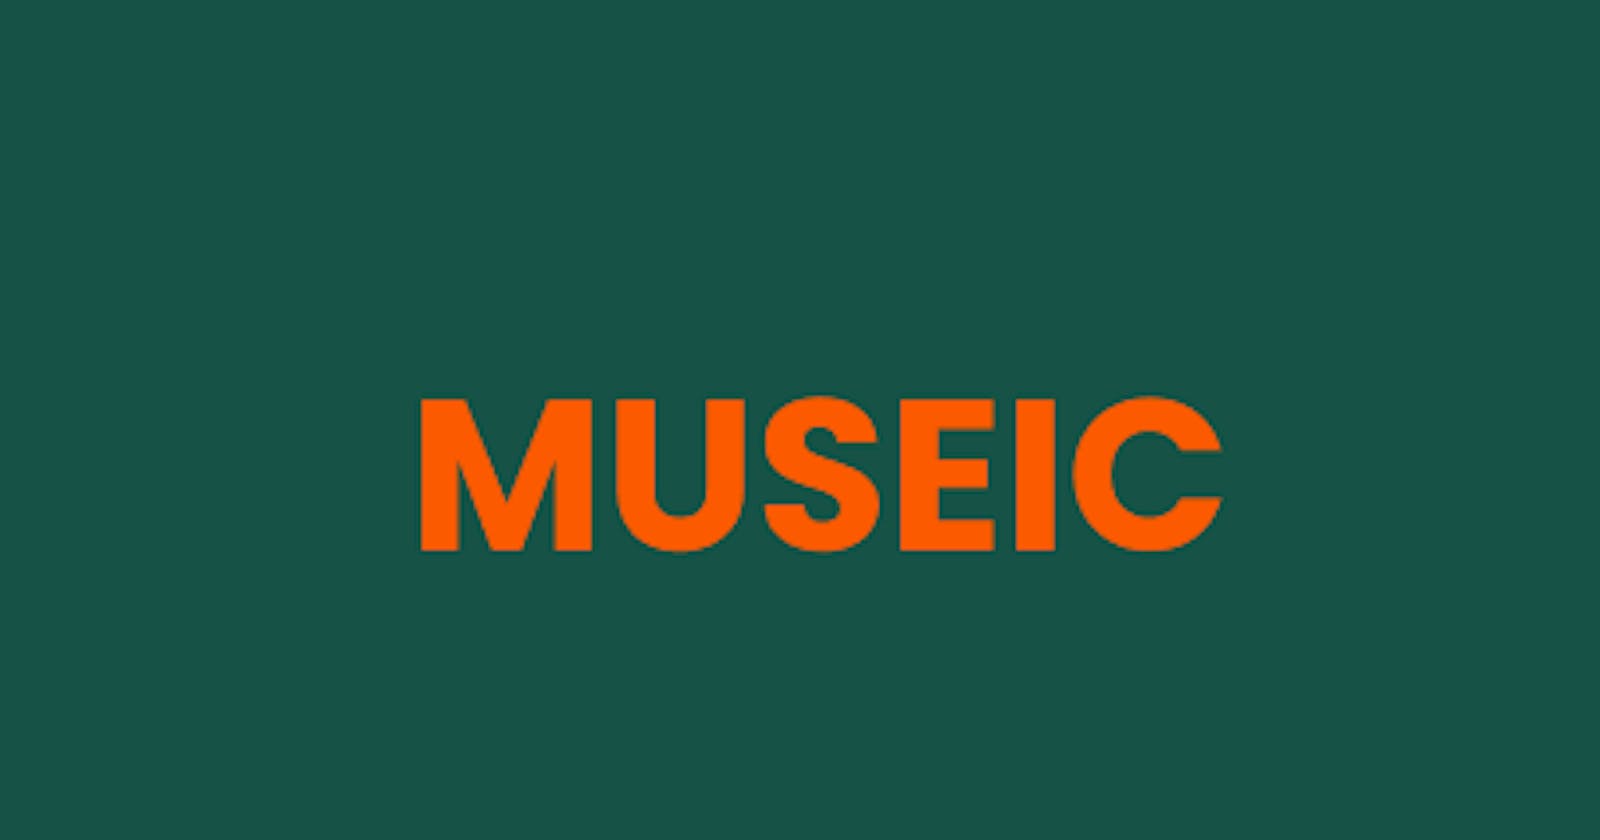 Museic; A music player application.